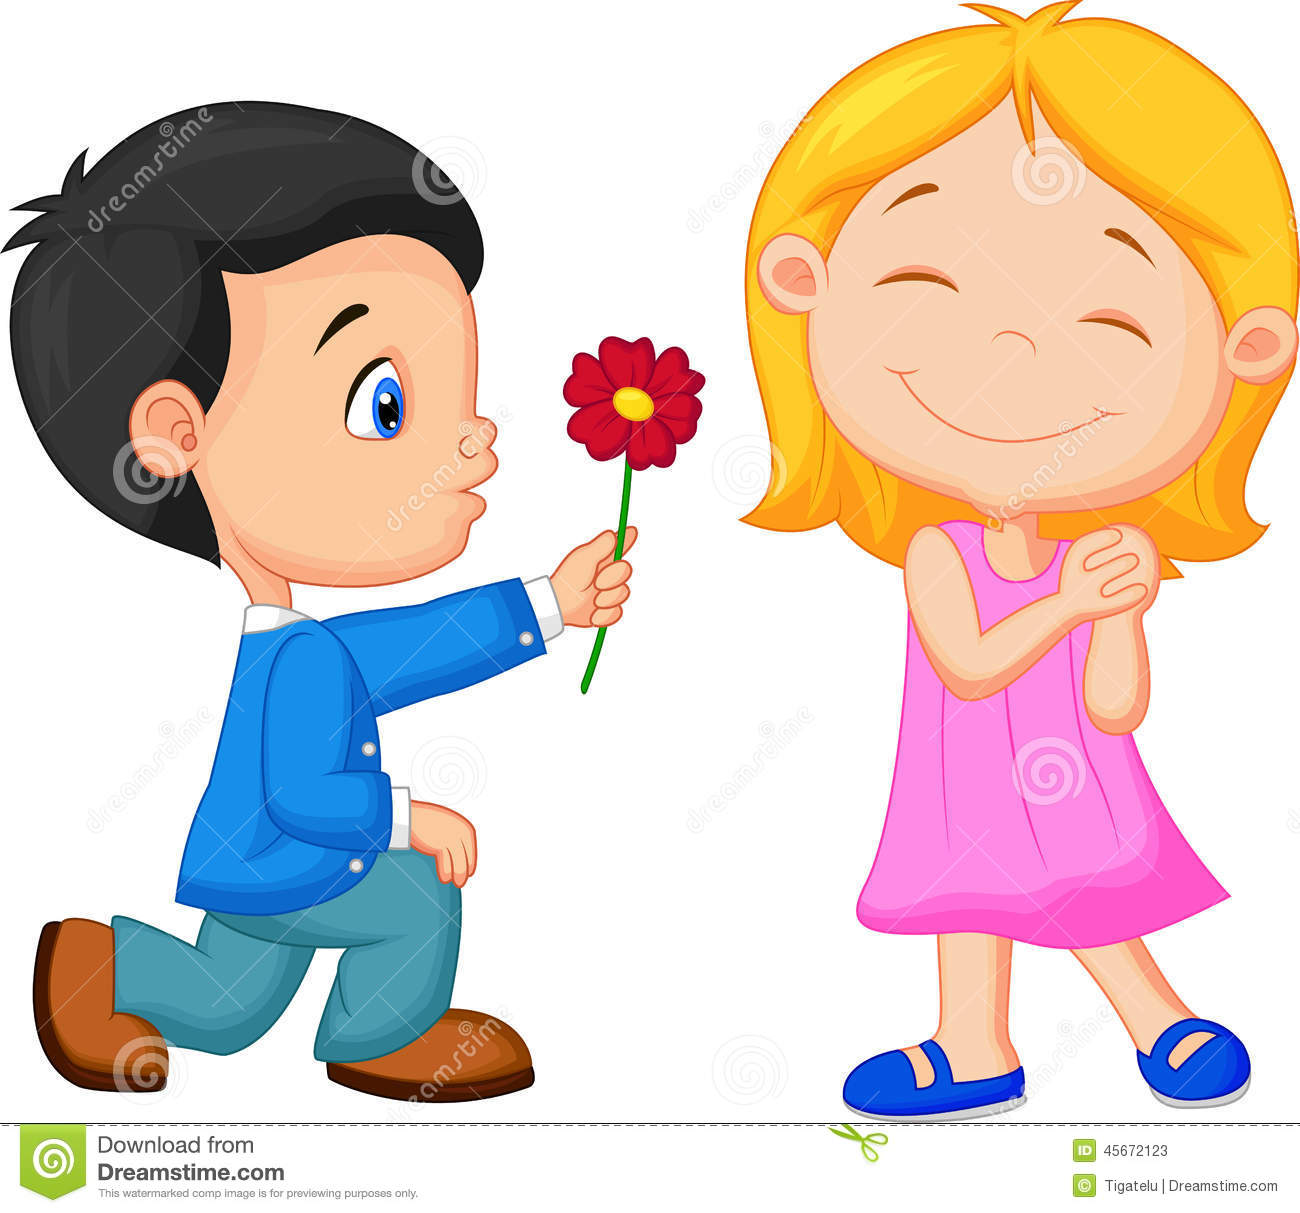 Showing post & media for Cartoon giving flowers.